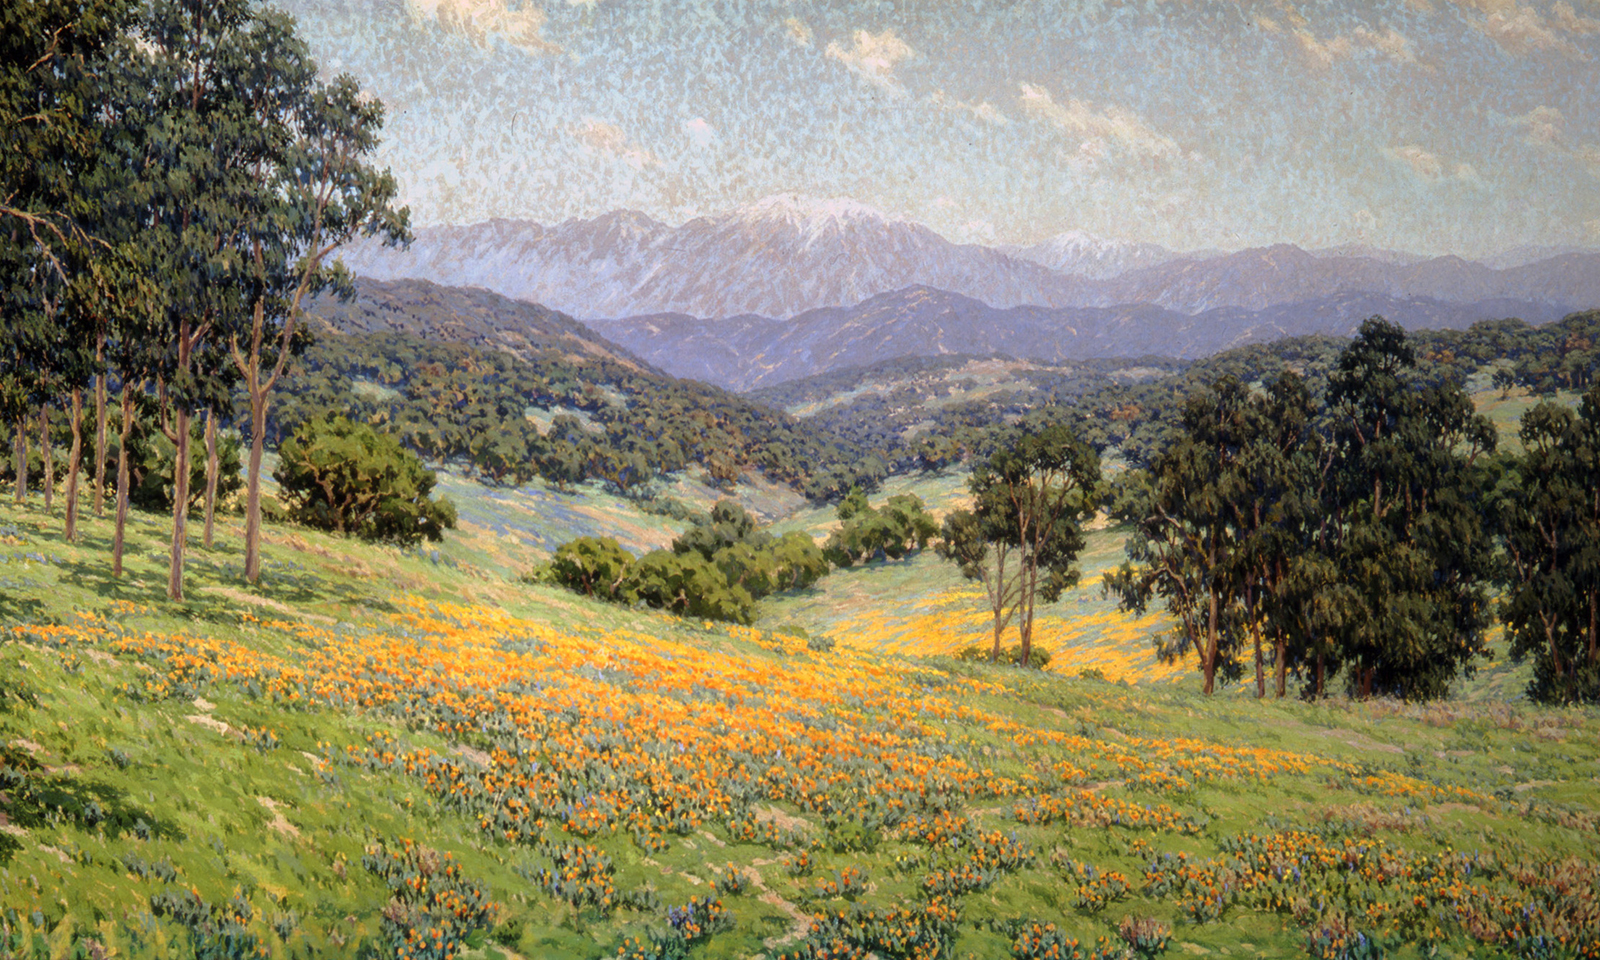 UCI museum captures California’s natural beauty